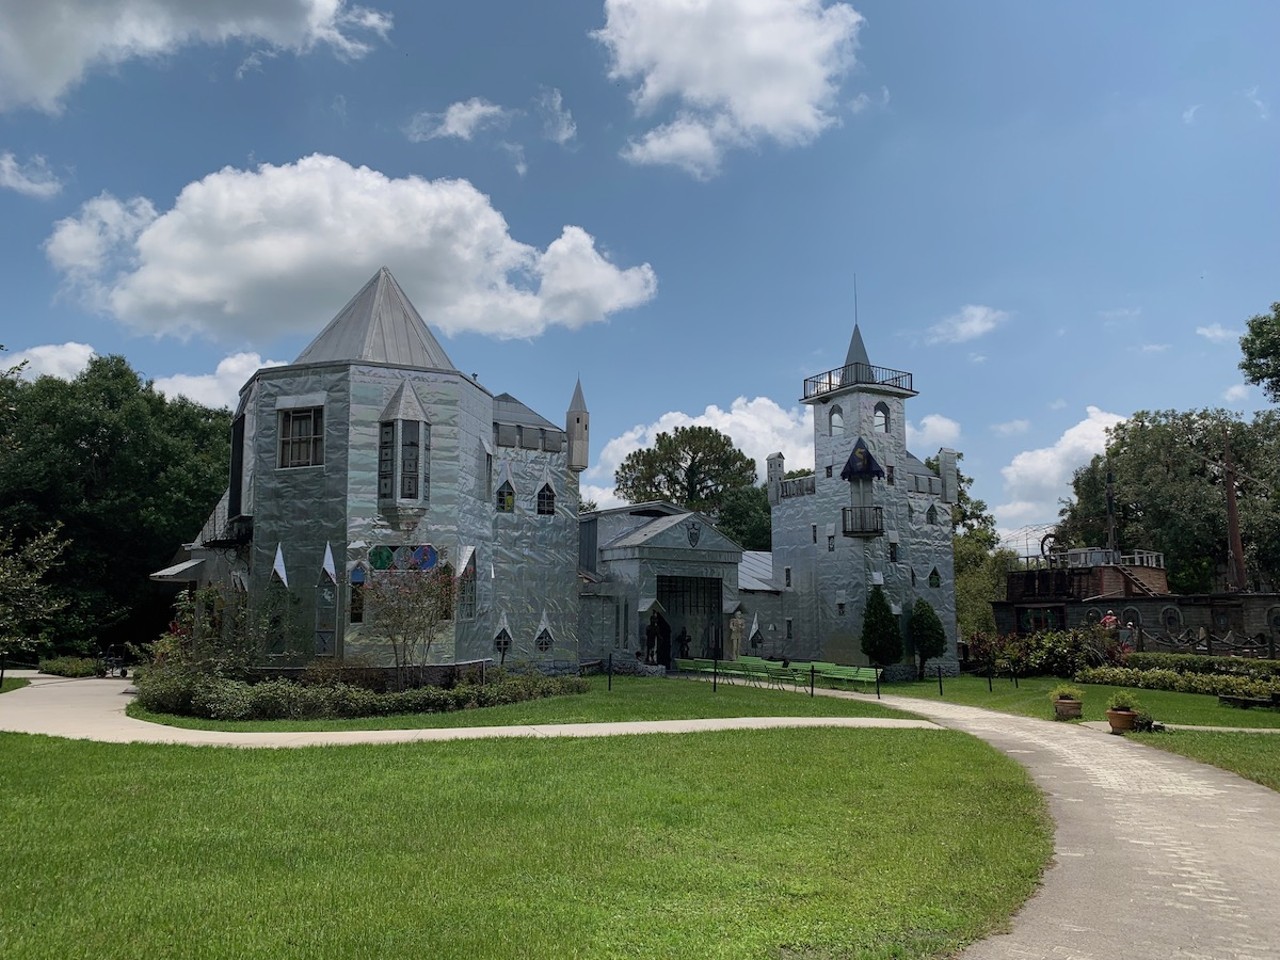 Visit an actual castle in Ona4533 Solomon Rd., Ona. (863) 494-6077 Solomon's Castle is, literally, a castle. It closes during the summer, but take the tour when it's open and make sure to visit the restaurant that's a boat on a moat for lunch.